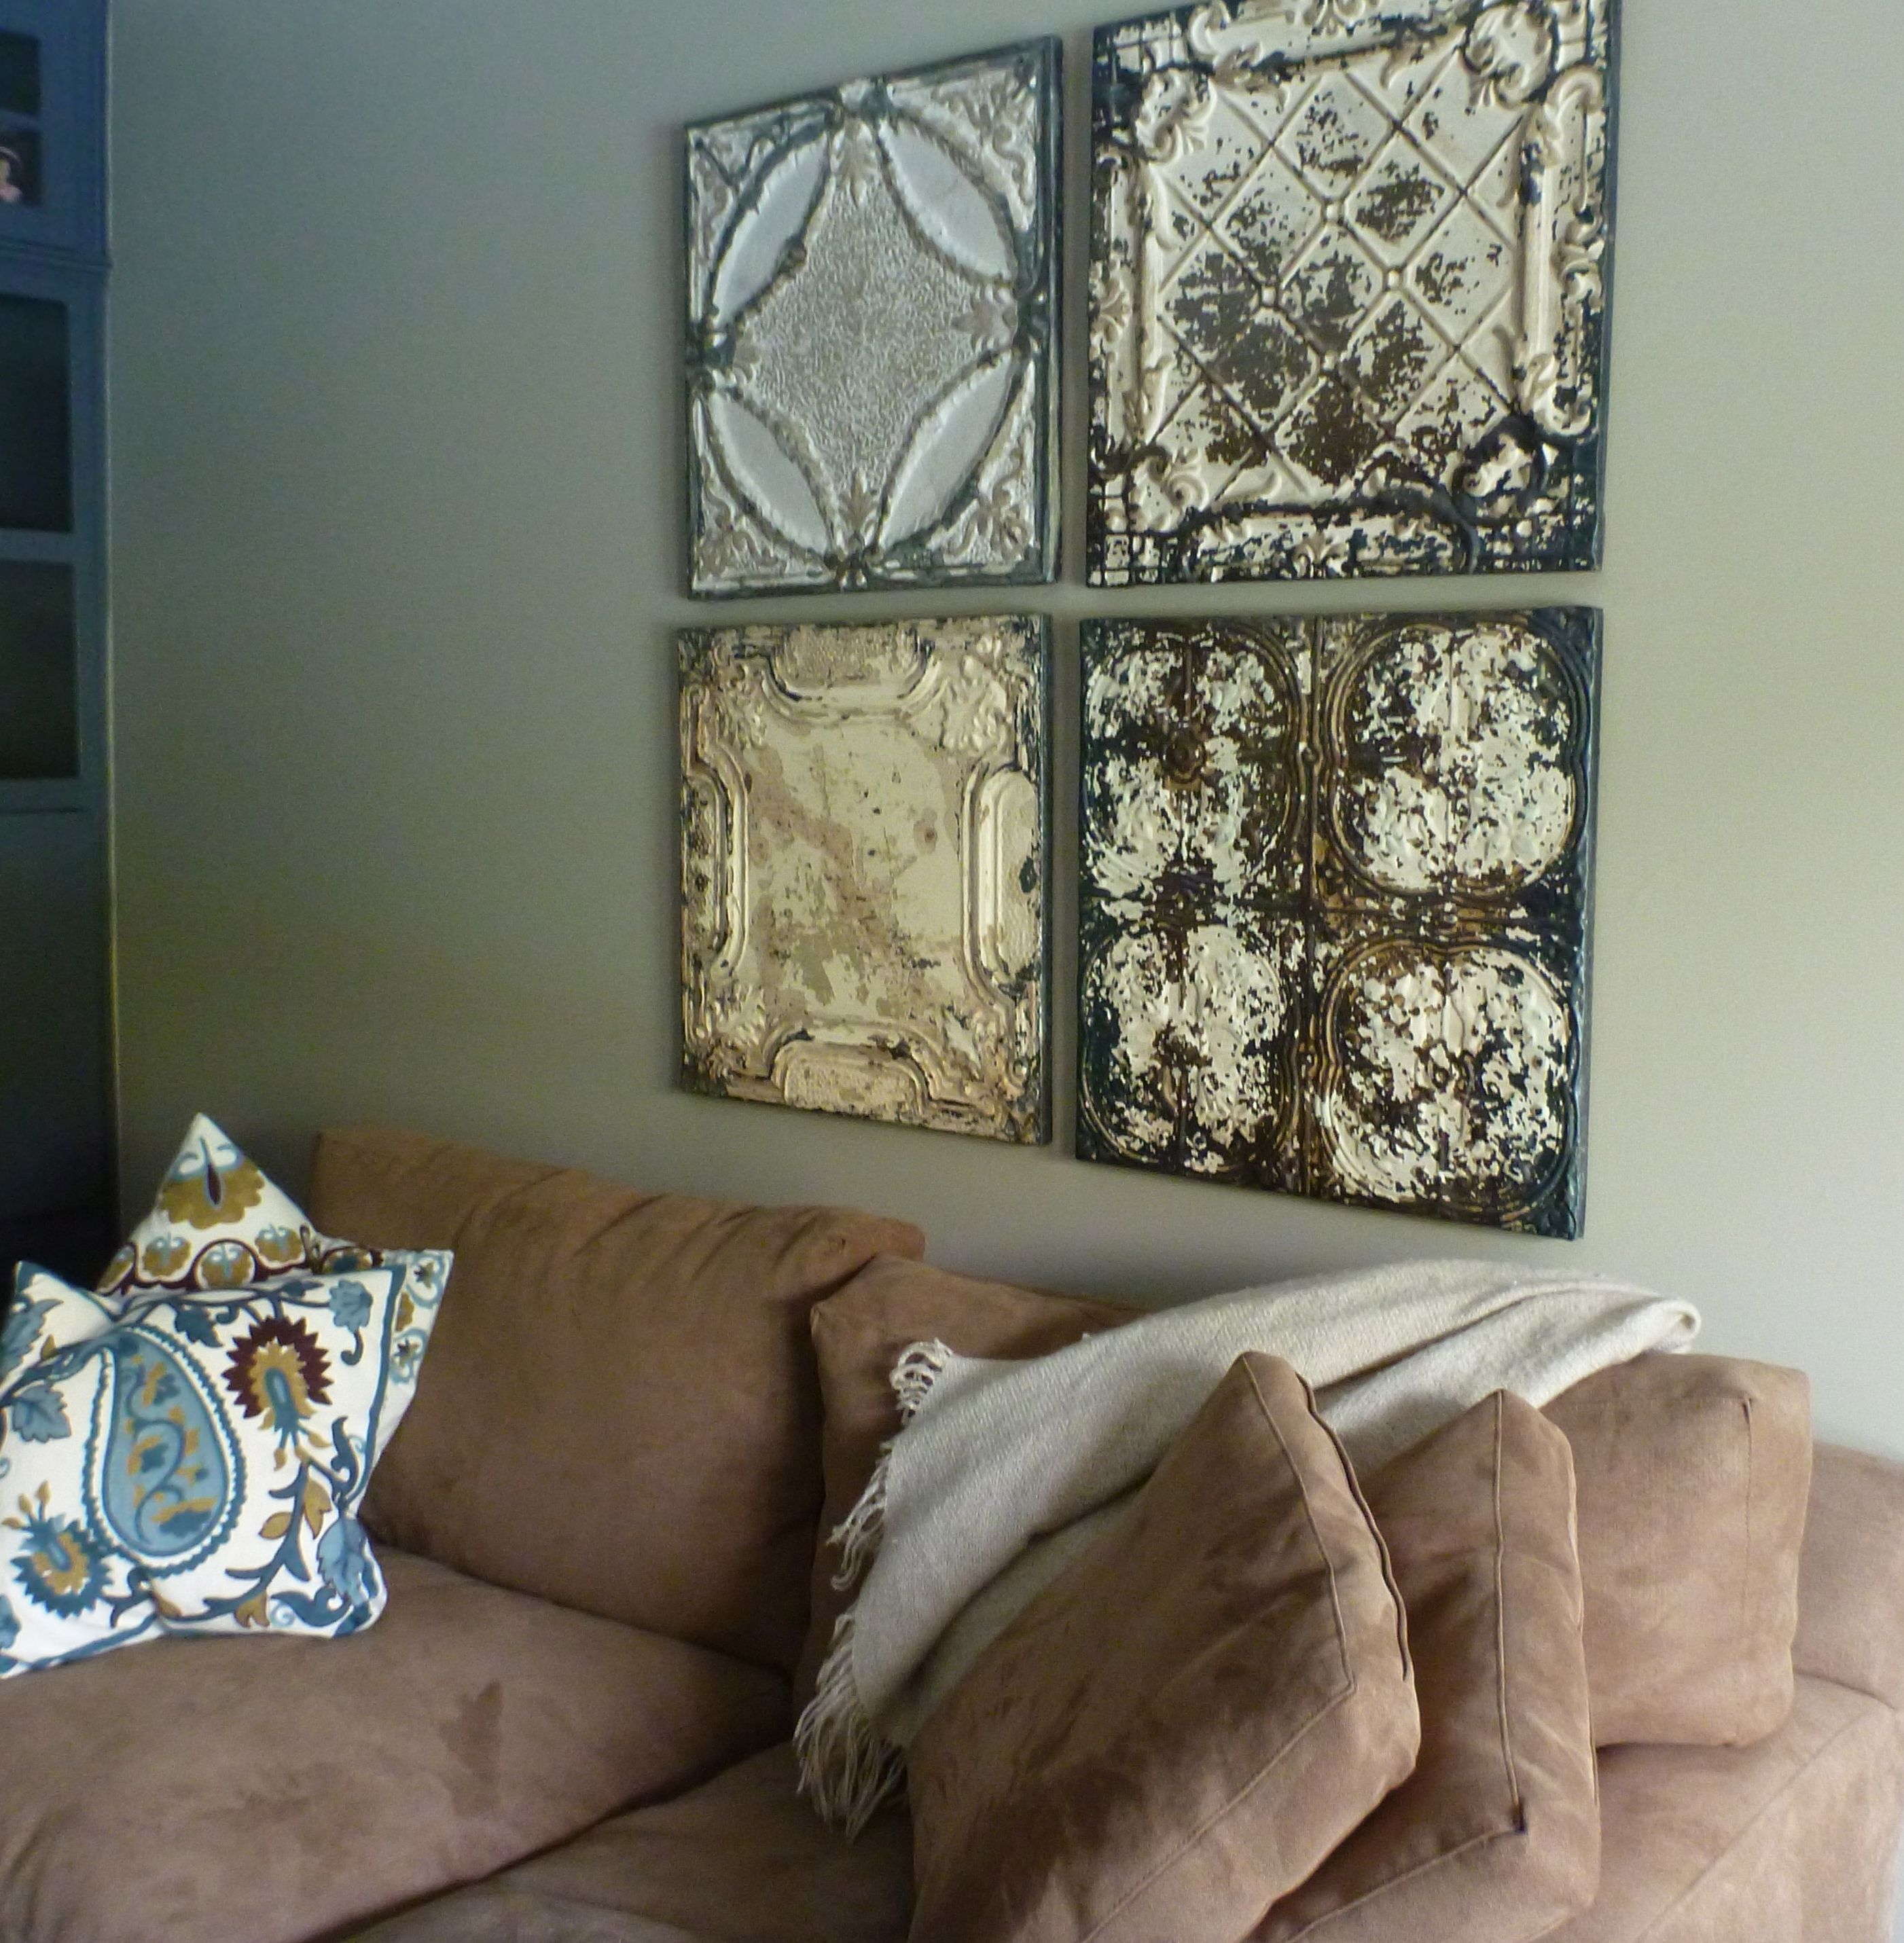 Fashionable Interior: Vintage Ceiling Tiles Decor With Sofa And Pillow Also Within Tin Wall Art (View 13 of 15)